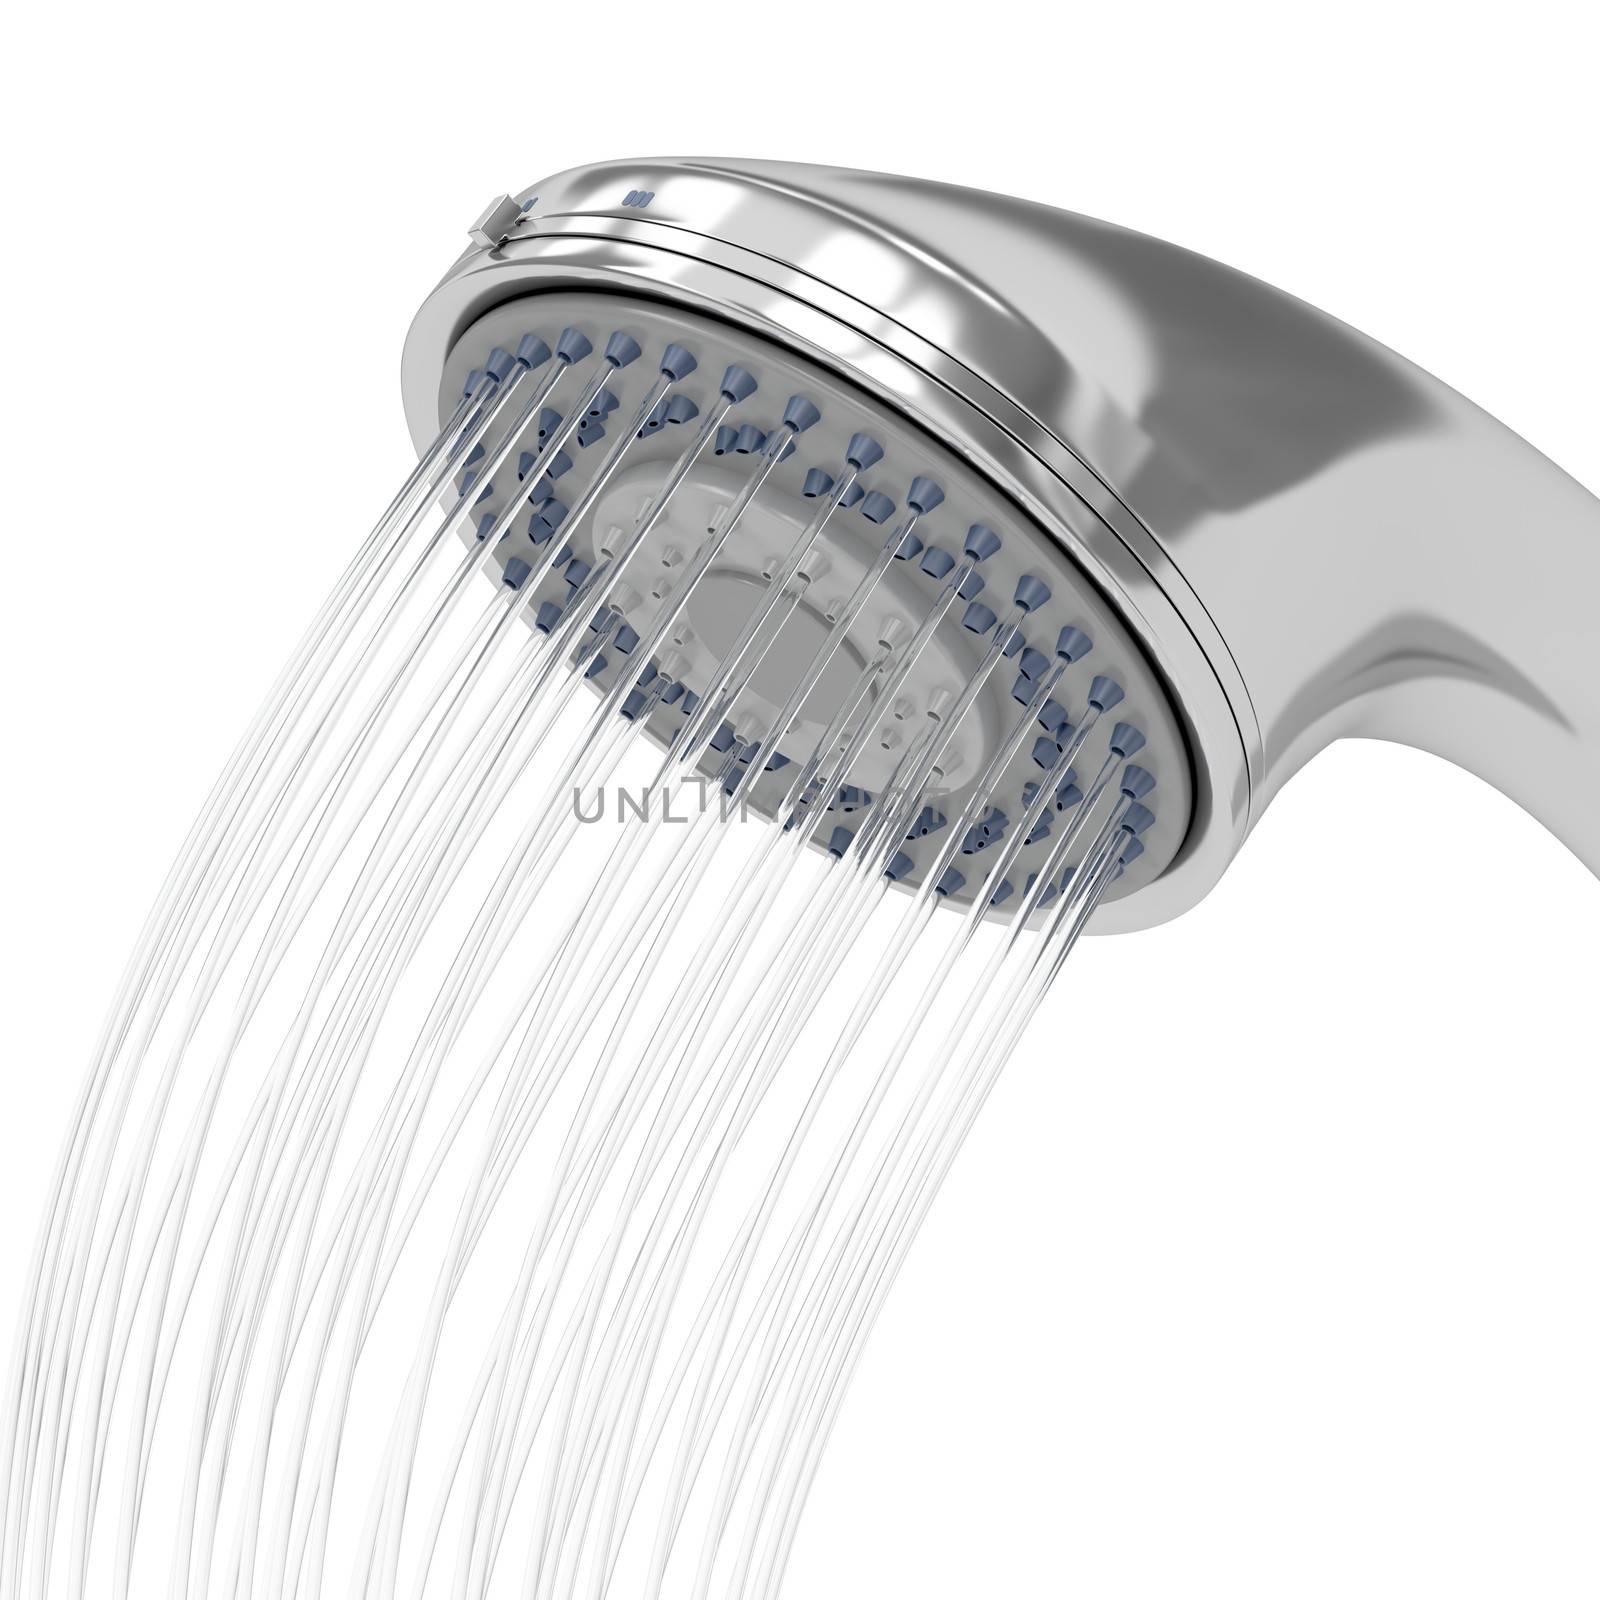 Shower head by magraphics